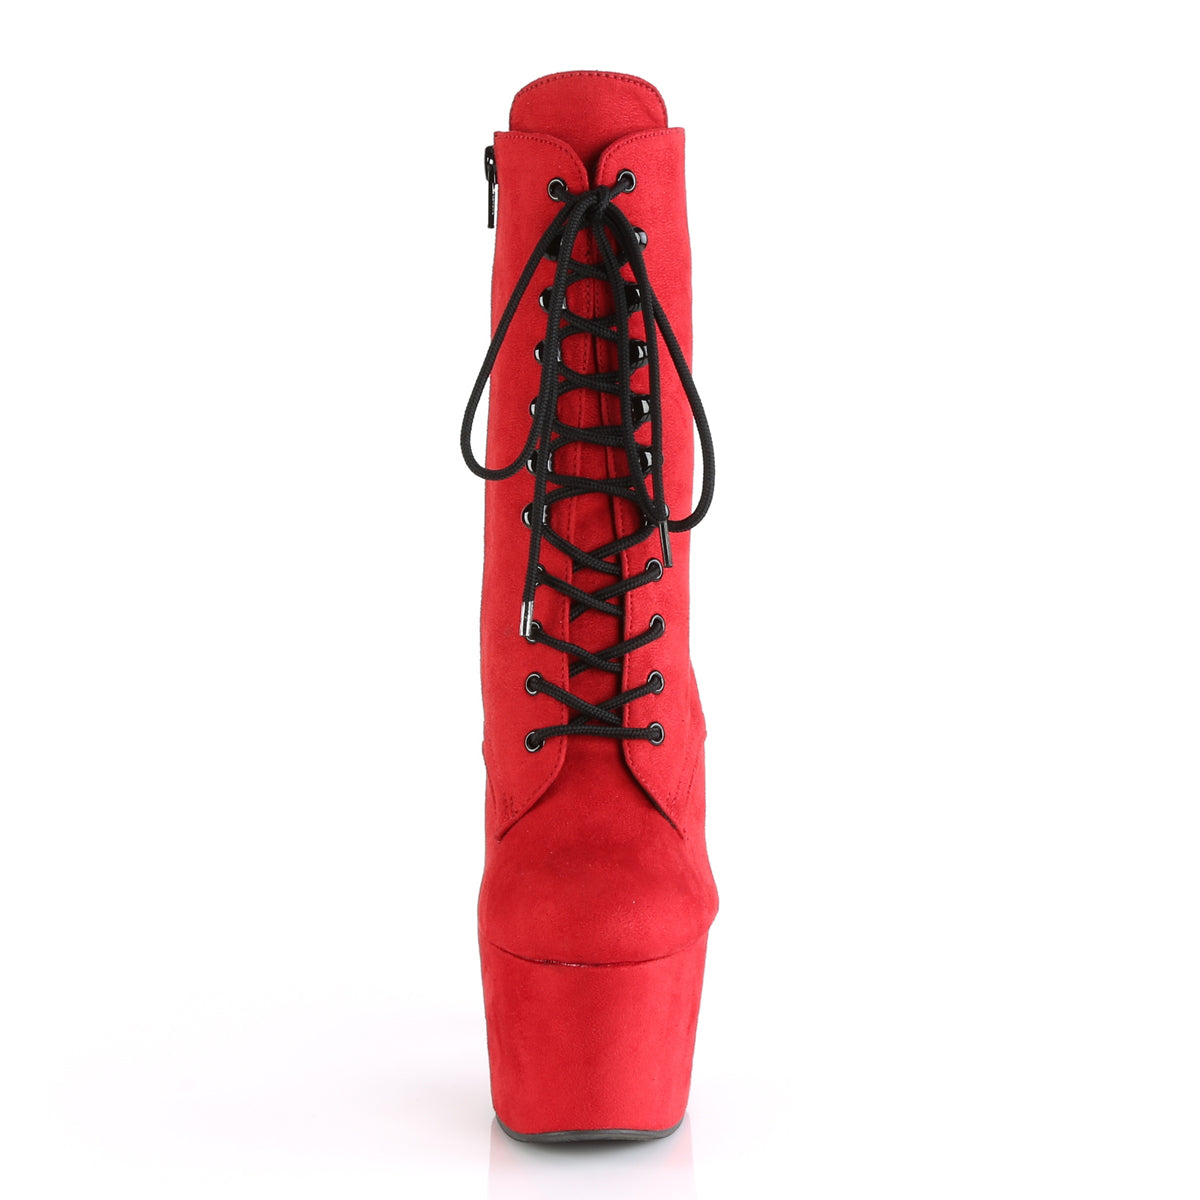 ADORE-1020FS Pleaser 7" Heel Red Exotic Dancing Ankle Boots-Pleaser- Sexy Shoes Alternative Footwear